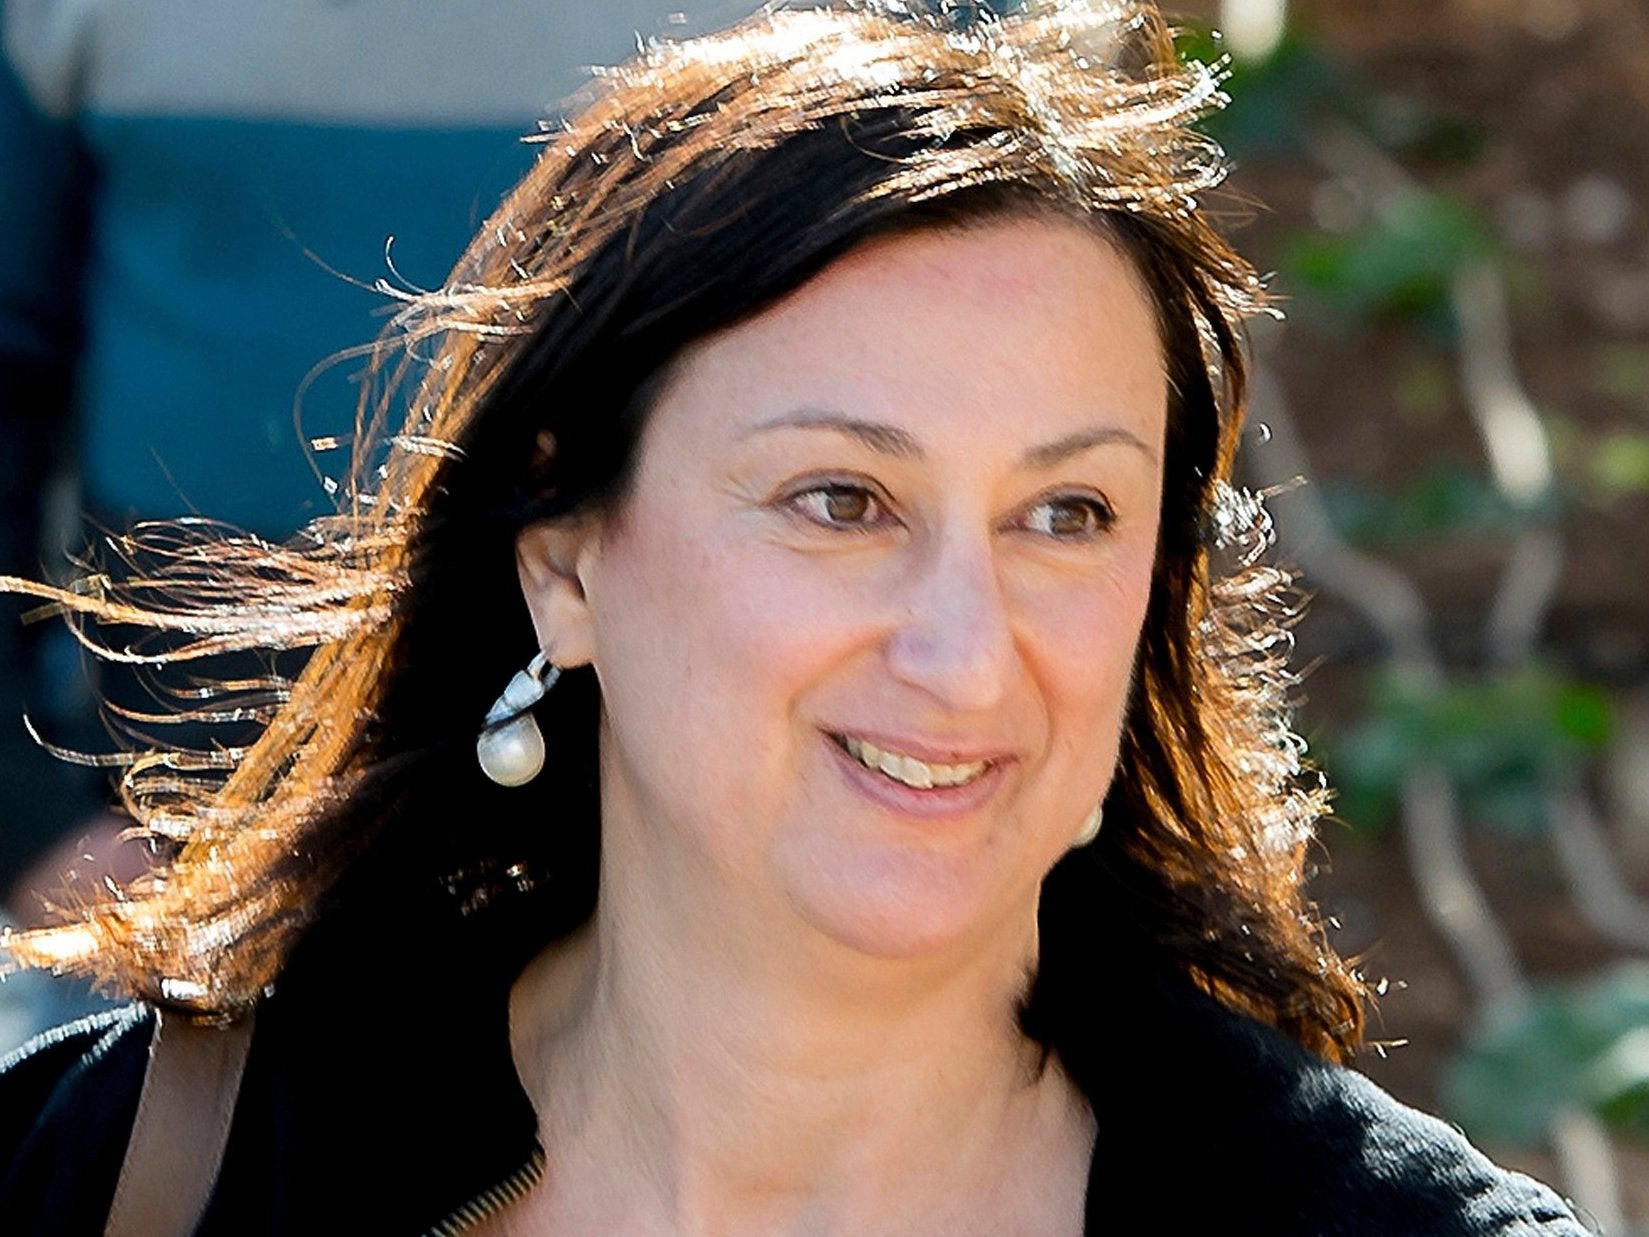 Ms Caruana Galizia was killed when a bomb destroyed her car in October. She was 53